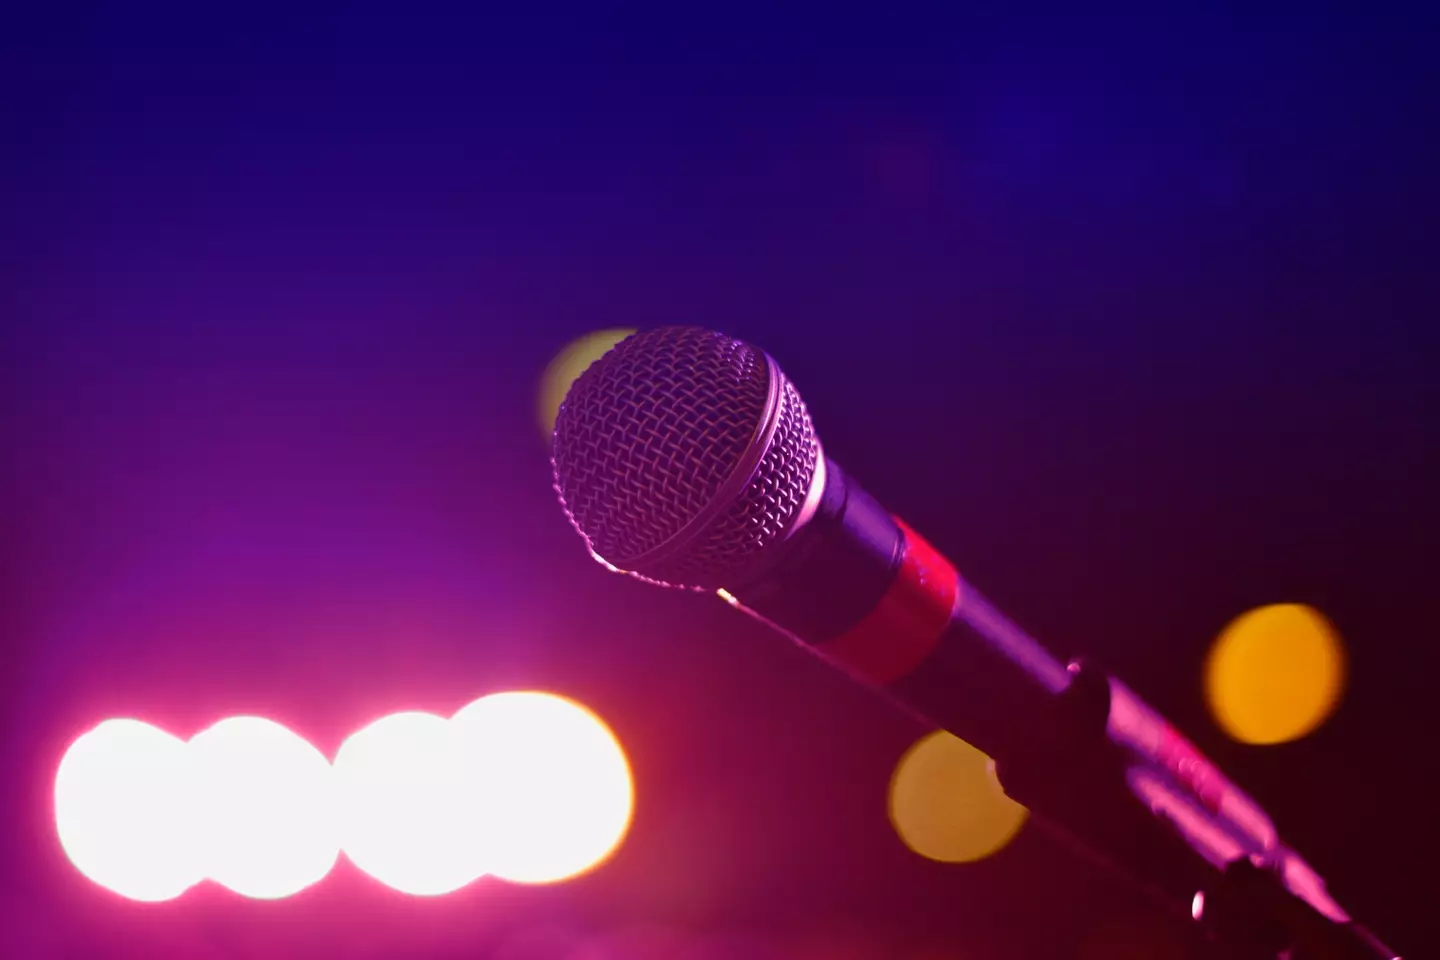 The world's deadliest karaoke song has been responsible for the deaths of 12 people since 1998.